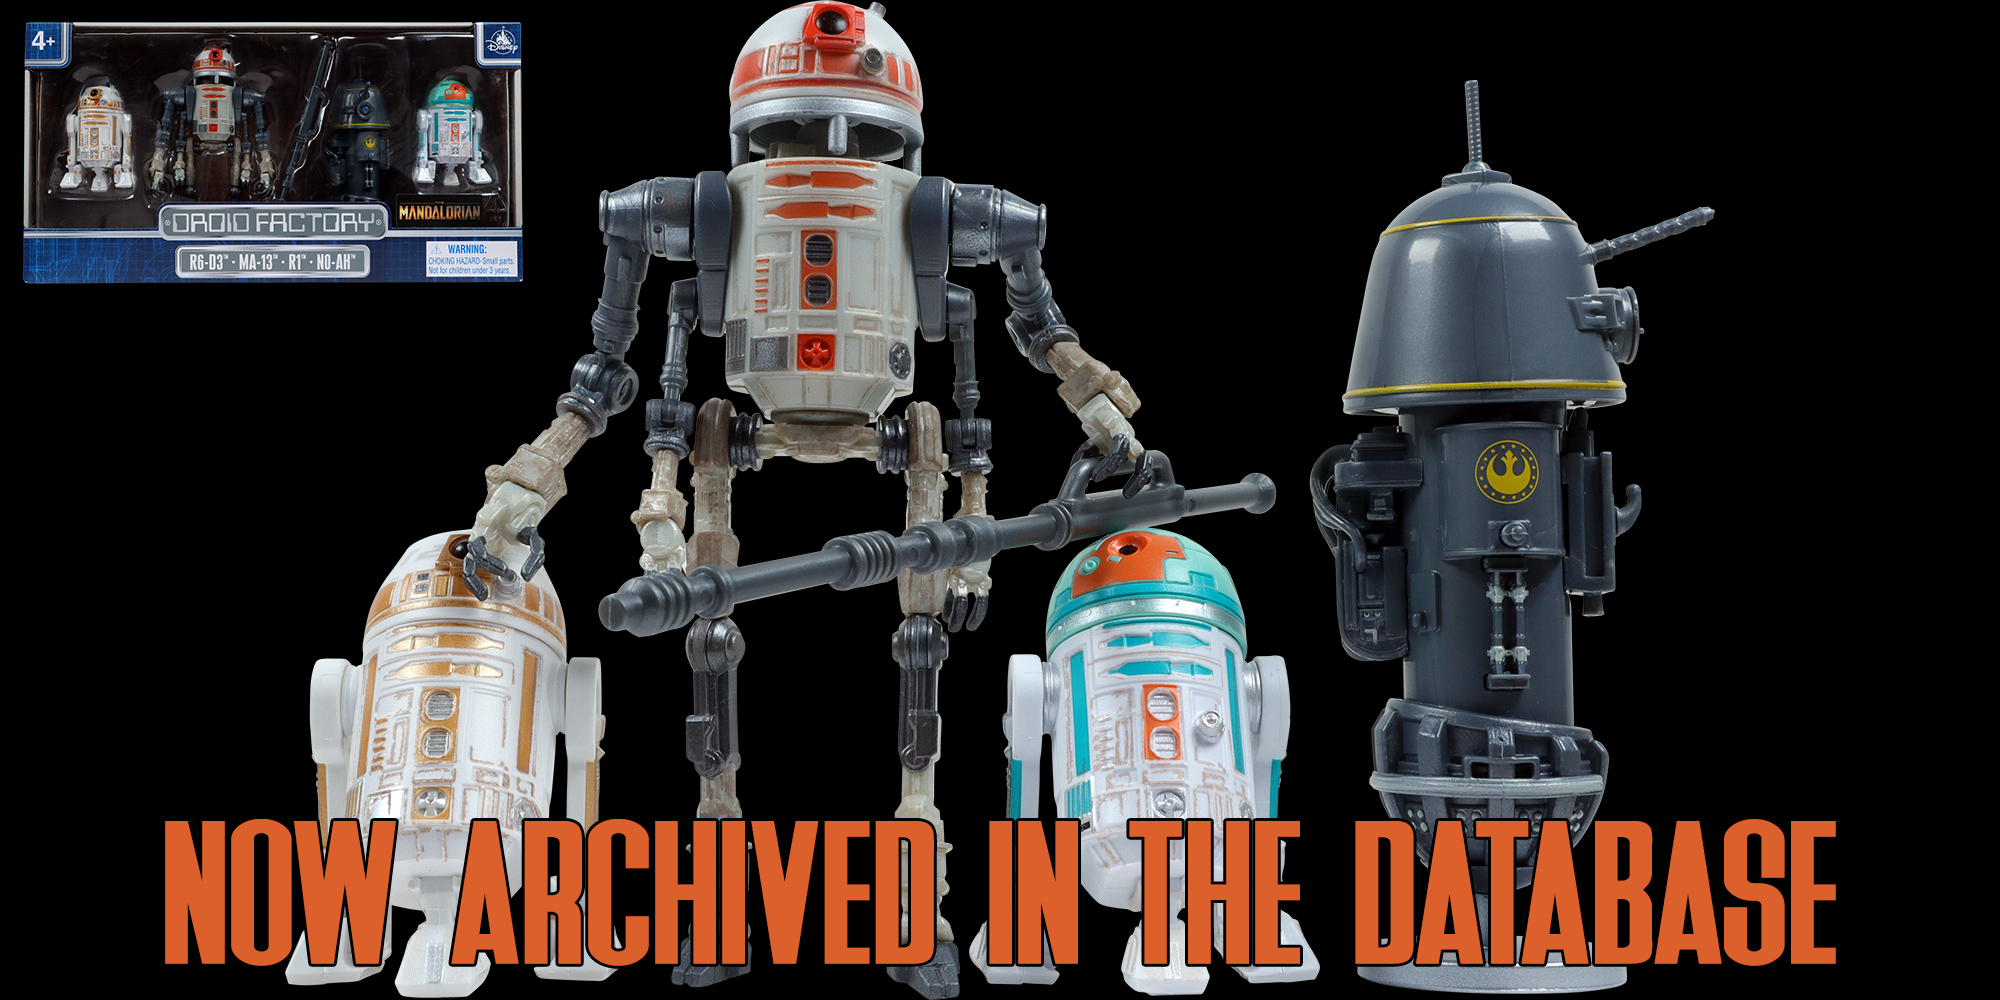 Droid Factory Mandalorian 4-Pack - Check It Out!